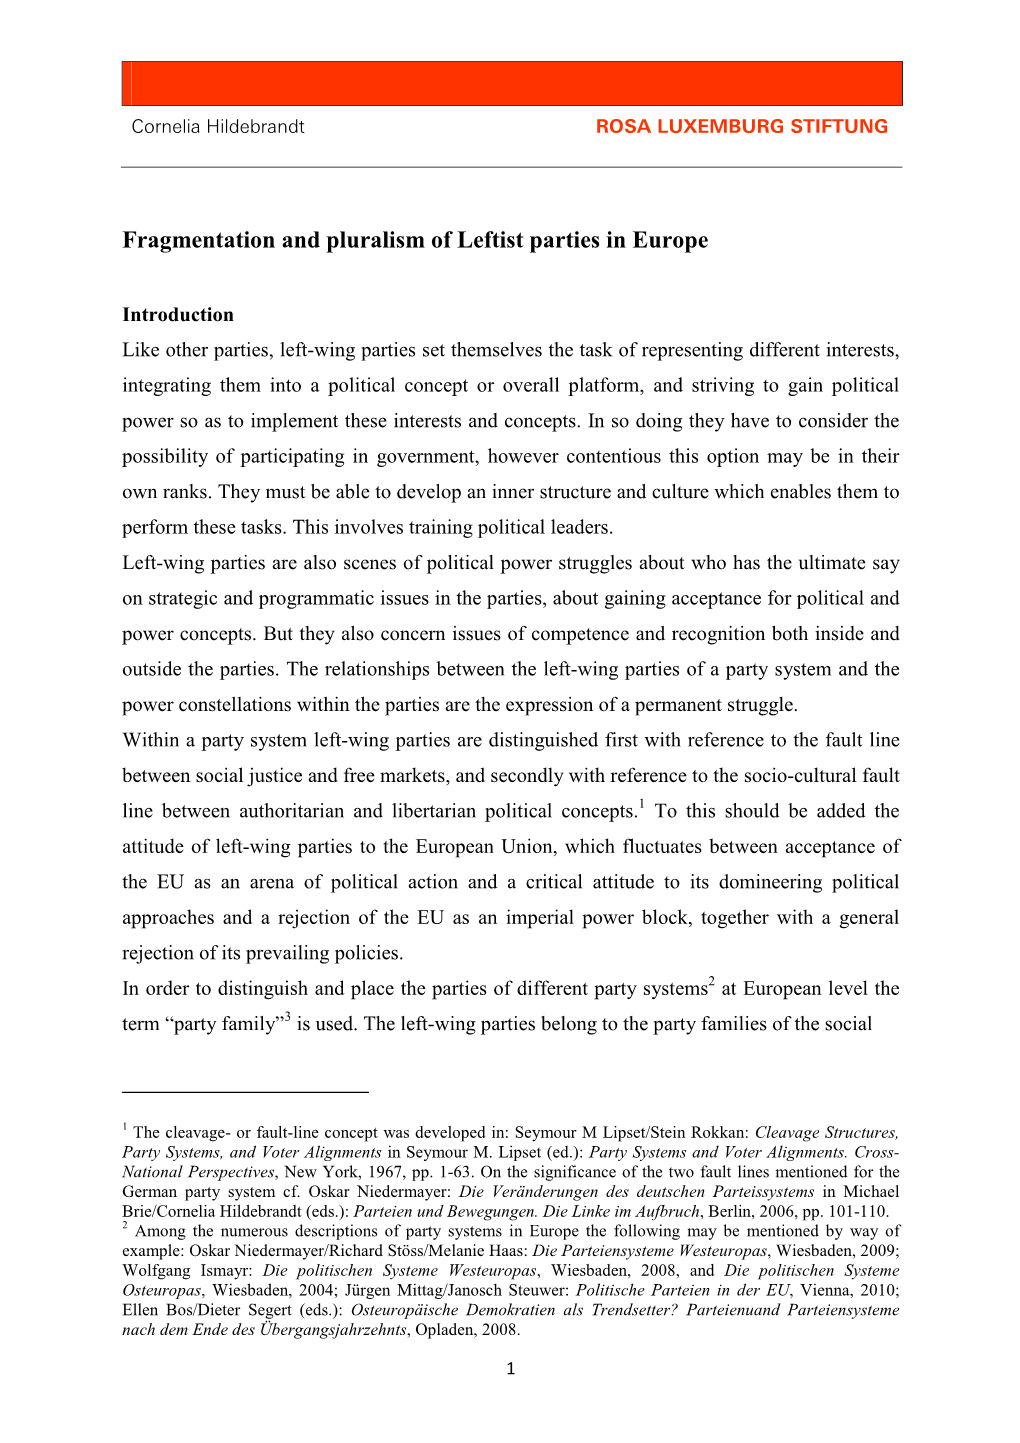 Fragmentation and Pluralism of Leftist Parties in Europe